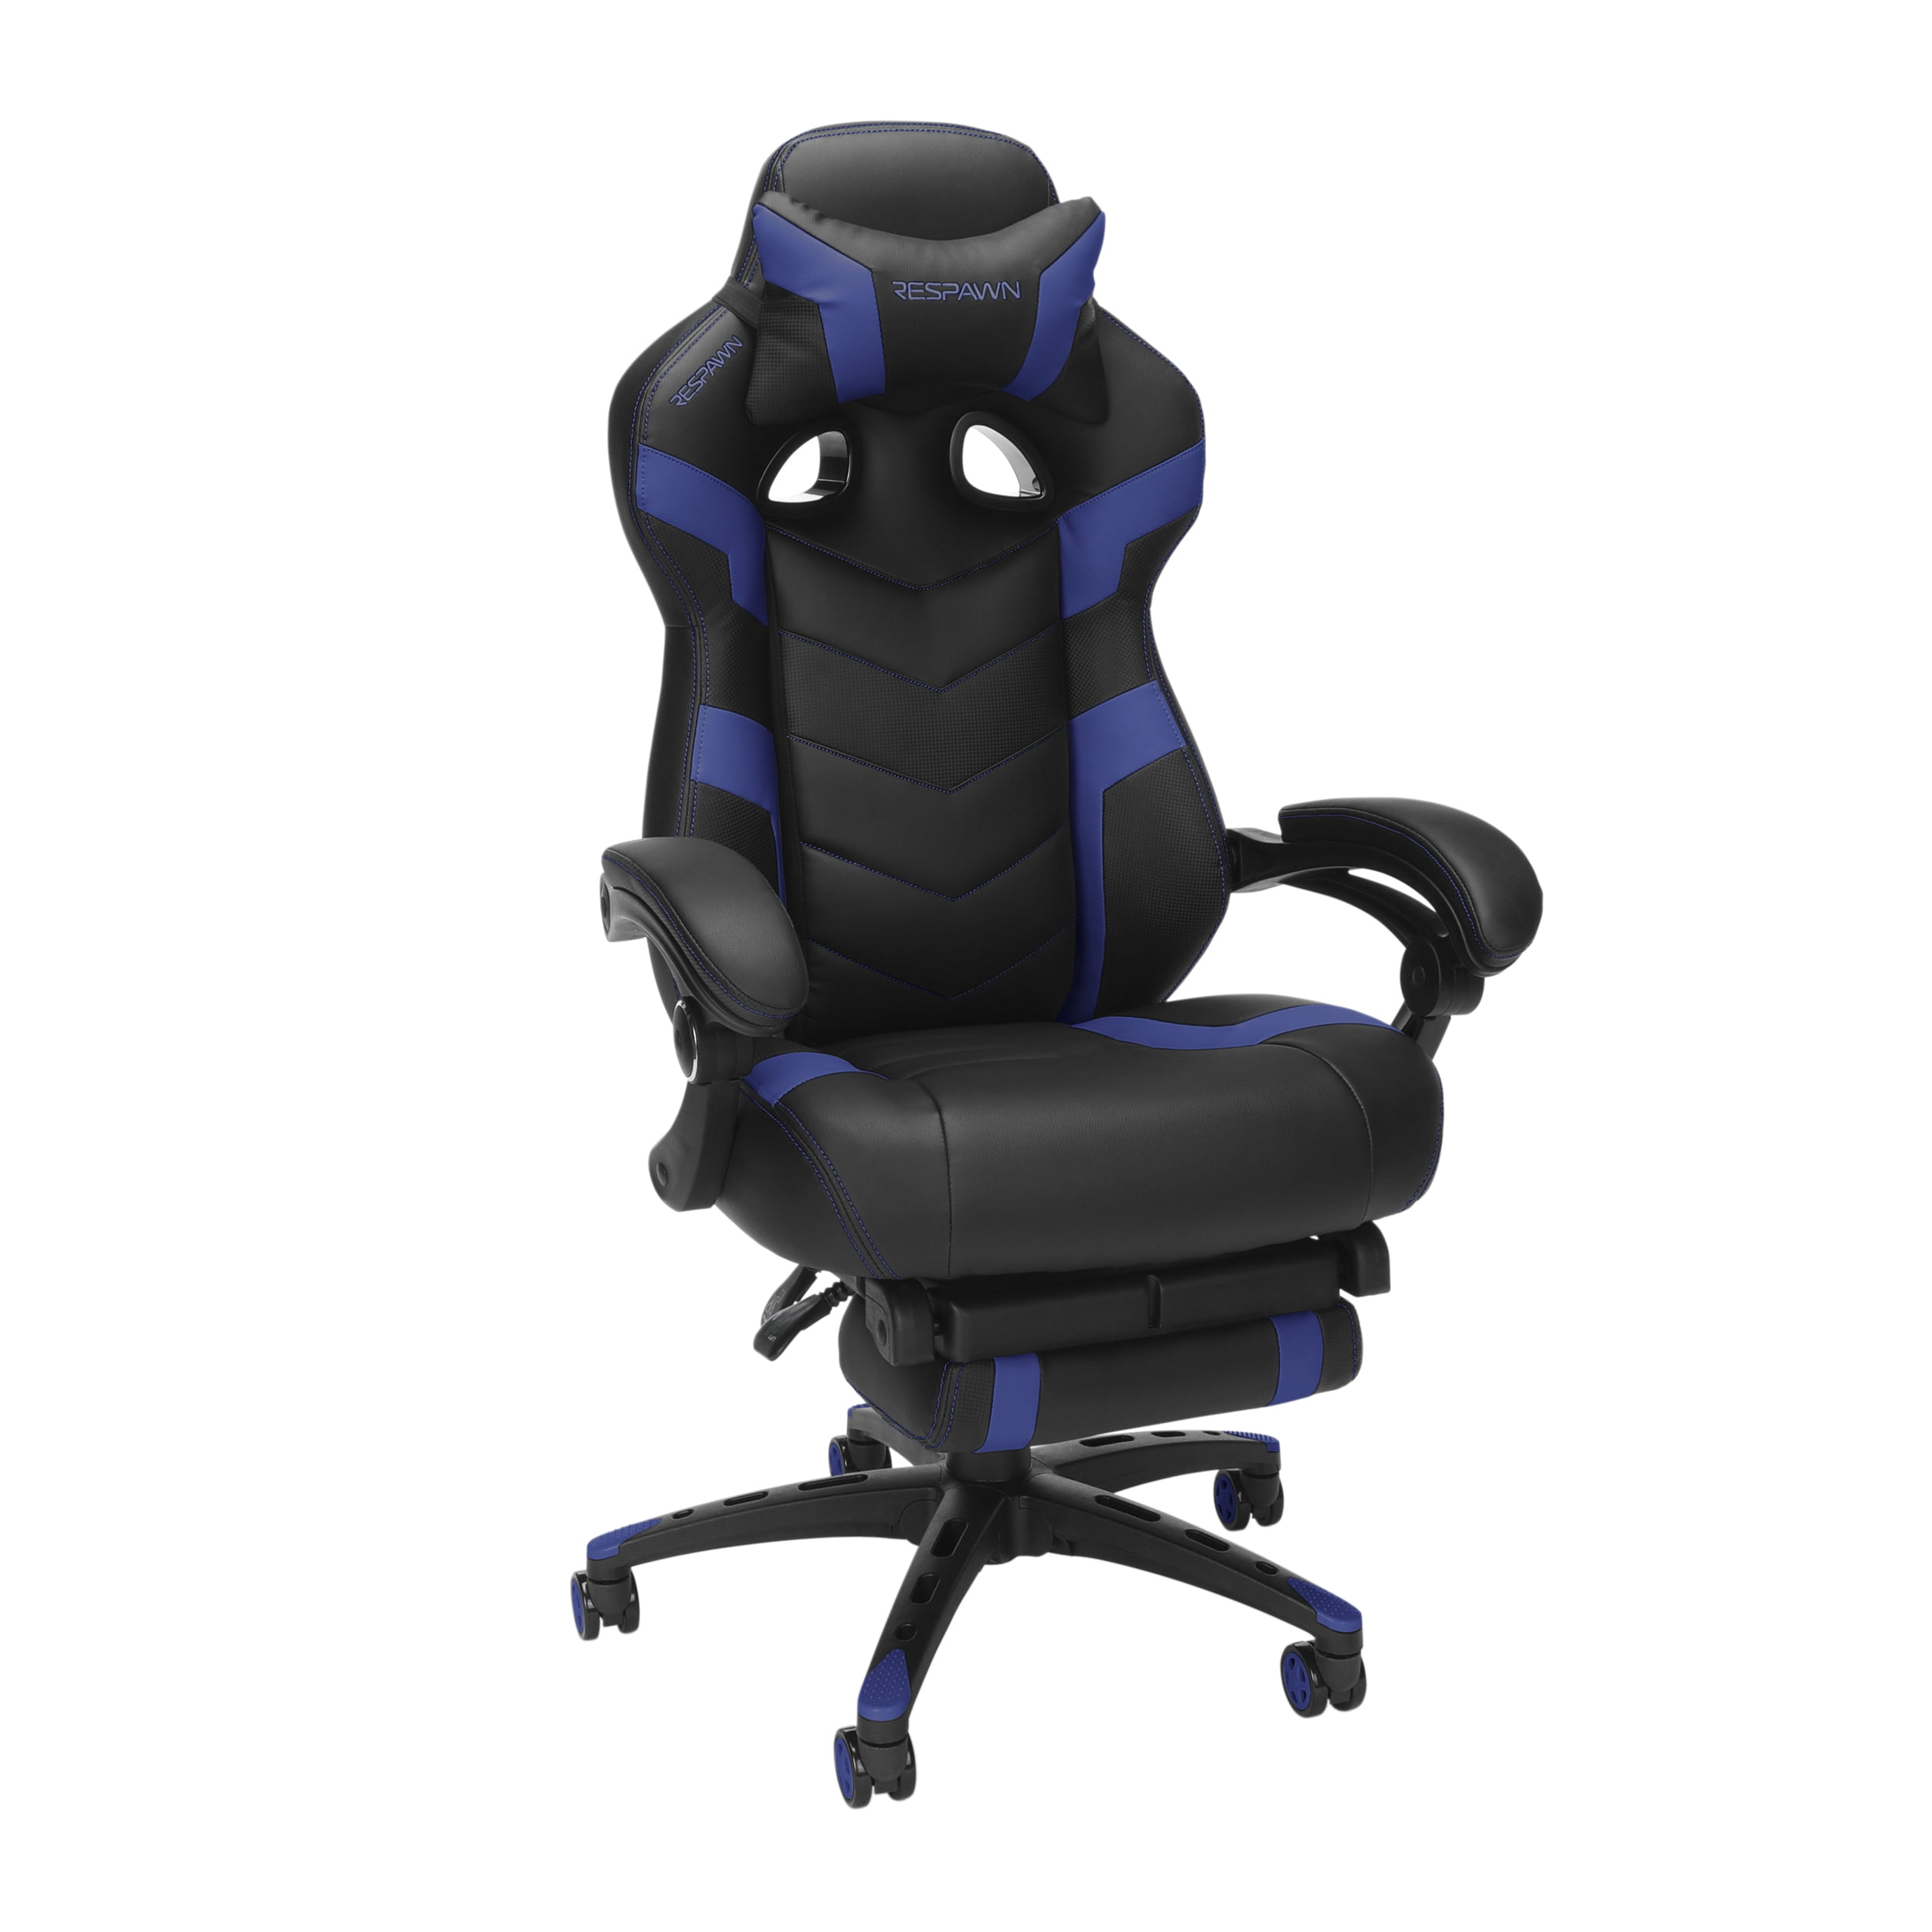 RESPAWN 110 Pro Racing Style Gaming Chair, Reclining Ergonomic Chair